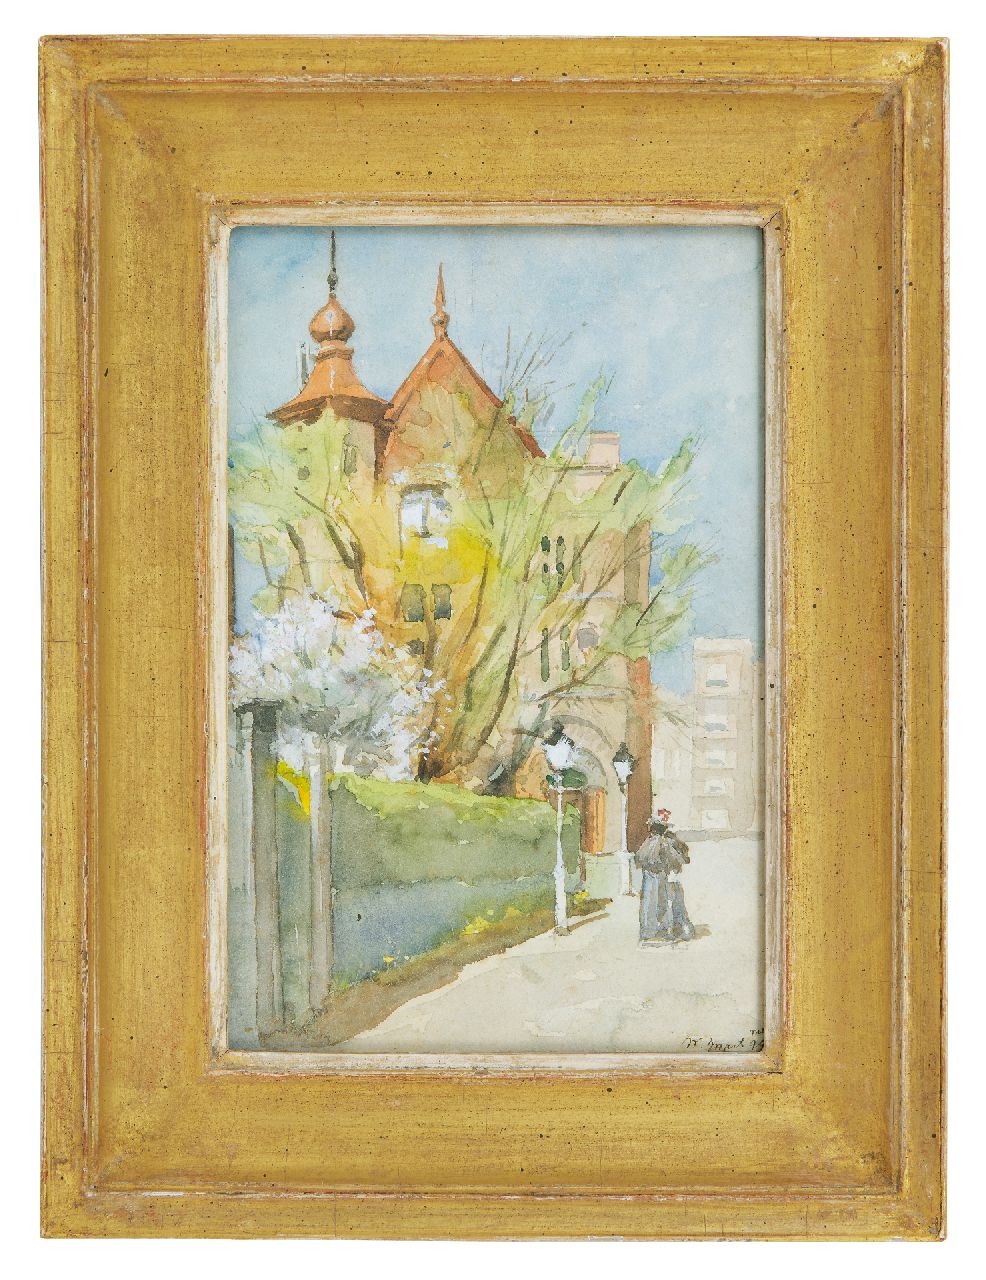 Zwart W.D.  | 'Willem' Dirk Zwart, Lady walking in sunny The Hague, watercolour on paper 22.8 x 15.1 cm, signed l.r. and dated May '99